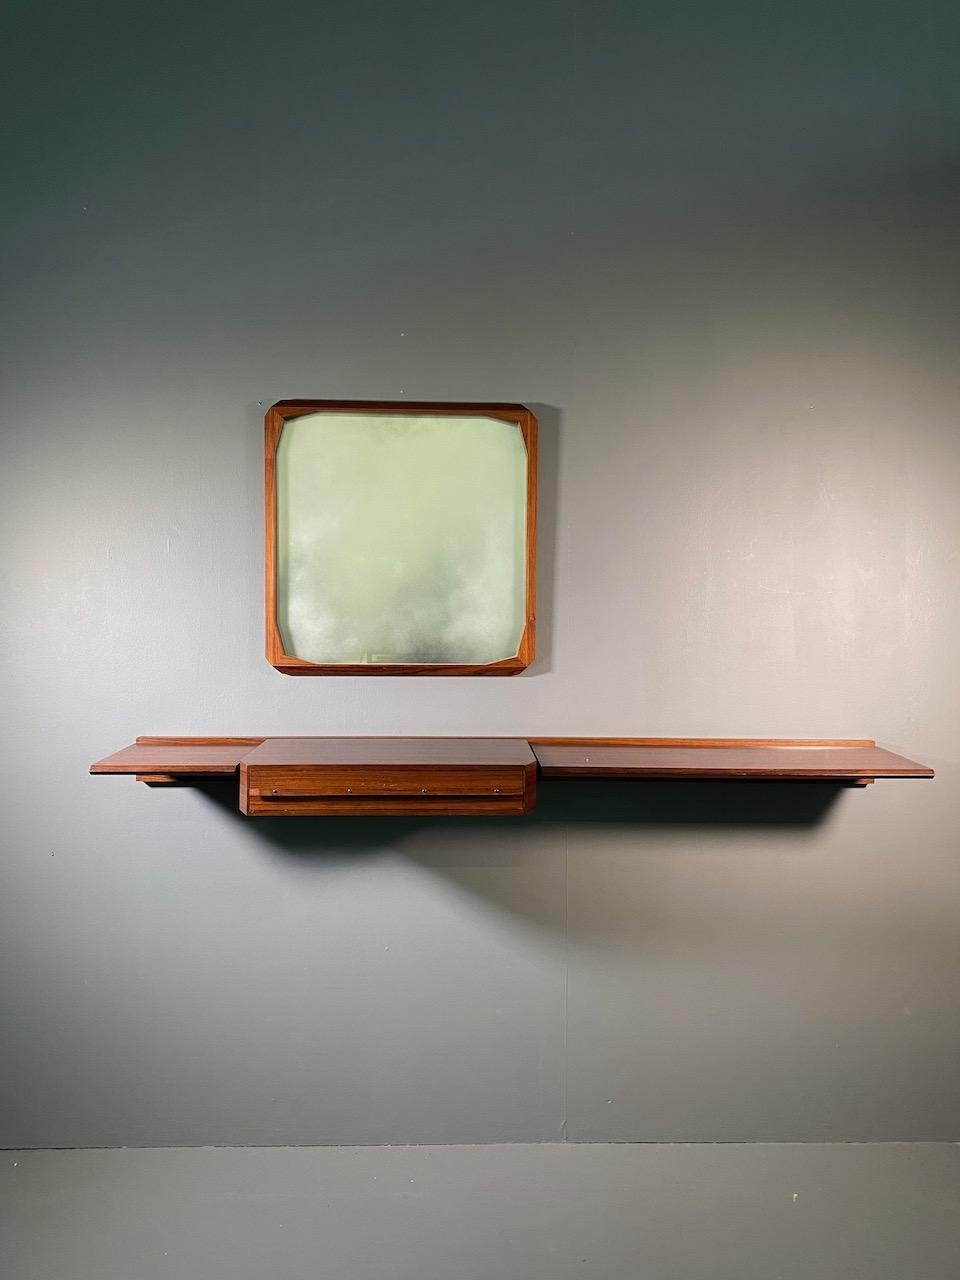 Wall Console and Mirror by Tredici of Pavia i 1950s, Designed by Dino Cavalli 3